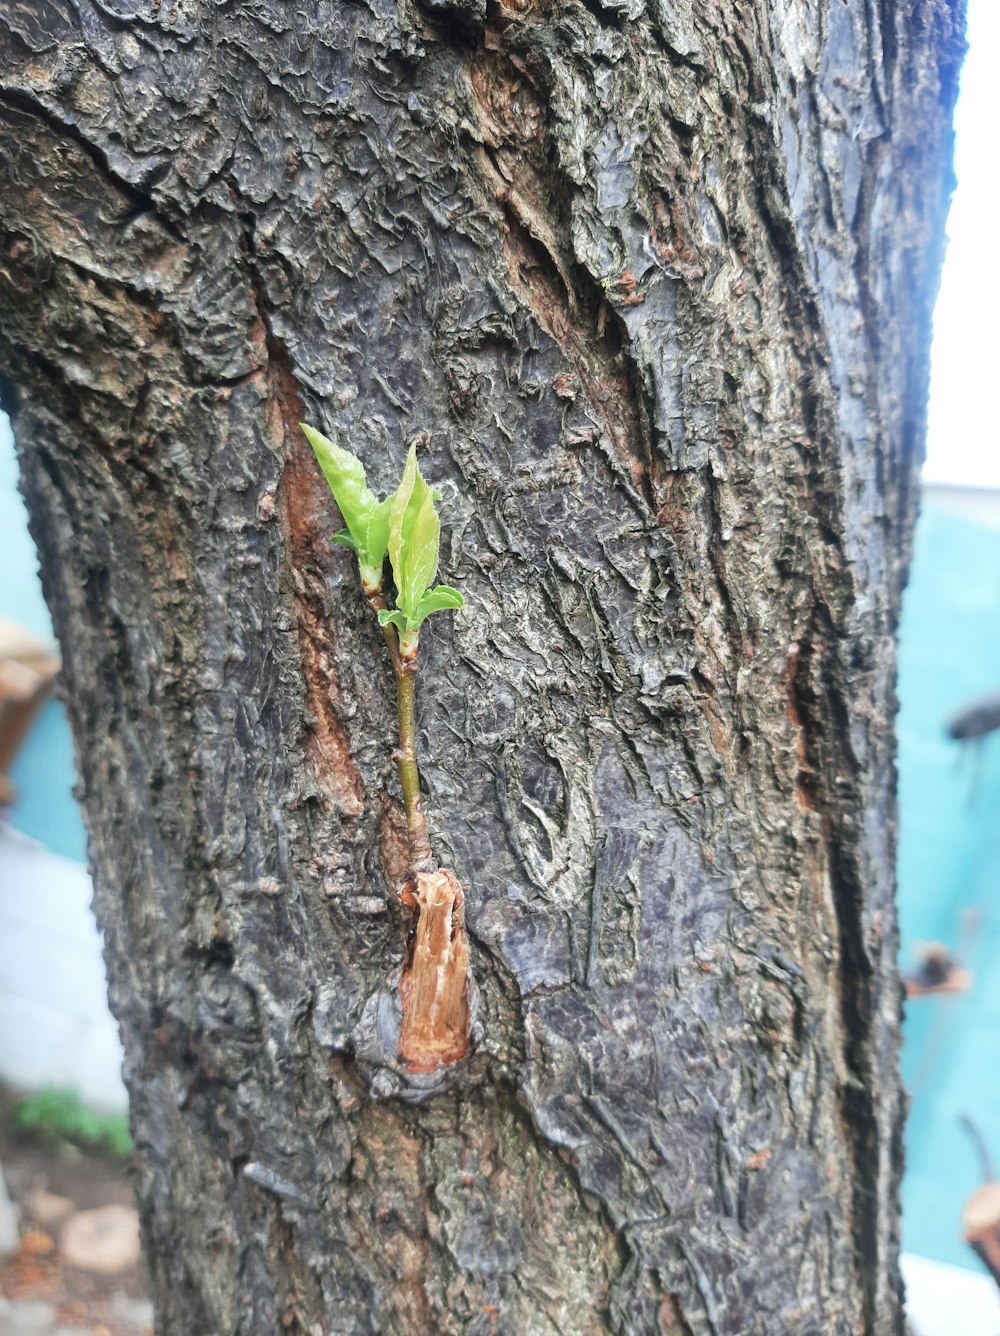 a small green plant growing on the bark of a tree